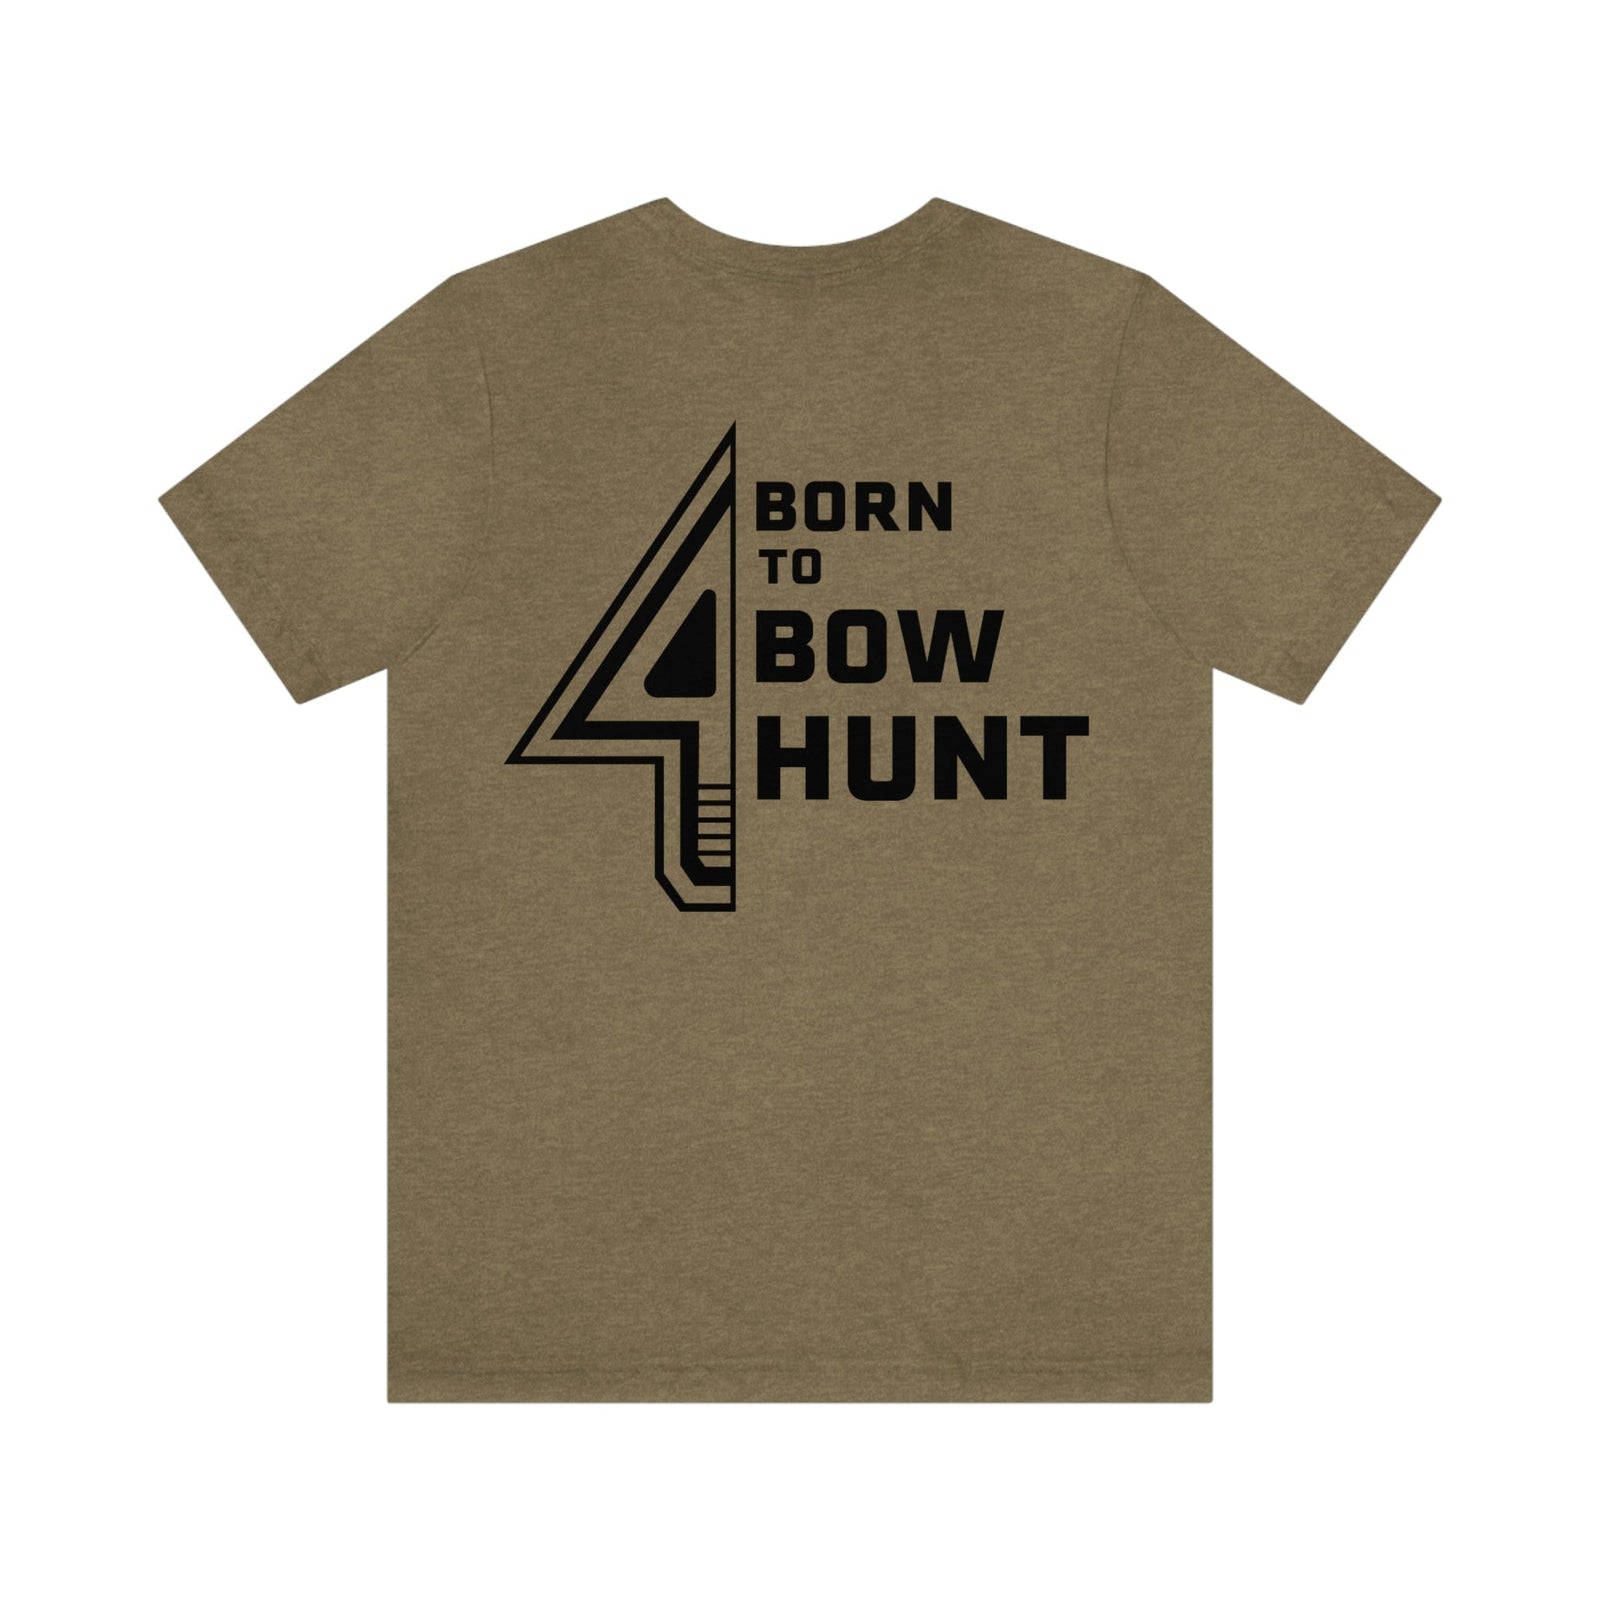 Tooth of the Arrow Born to Bowhunt Tee